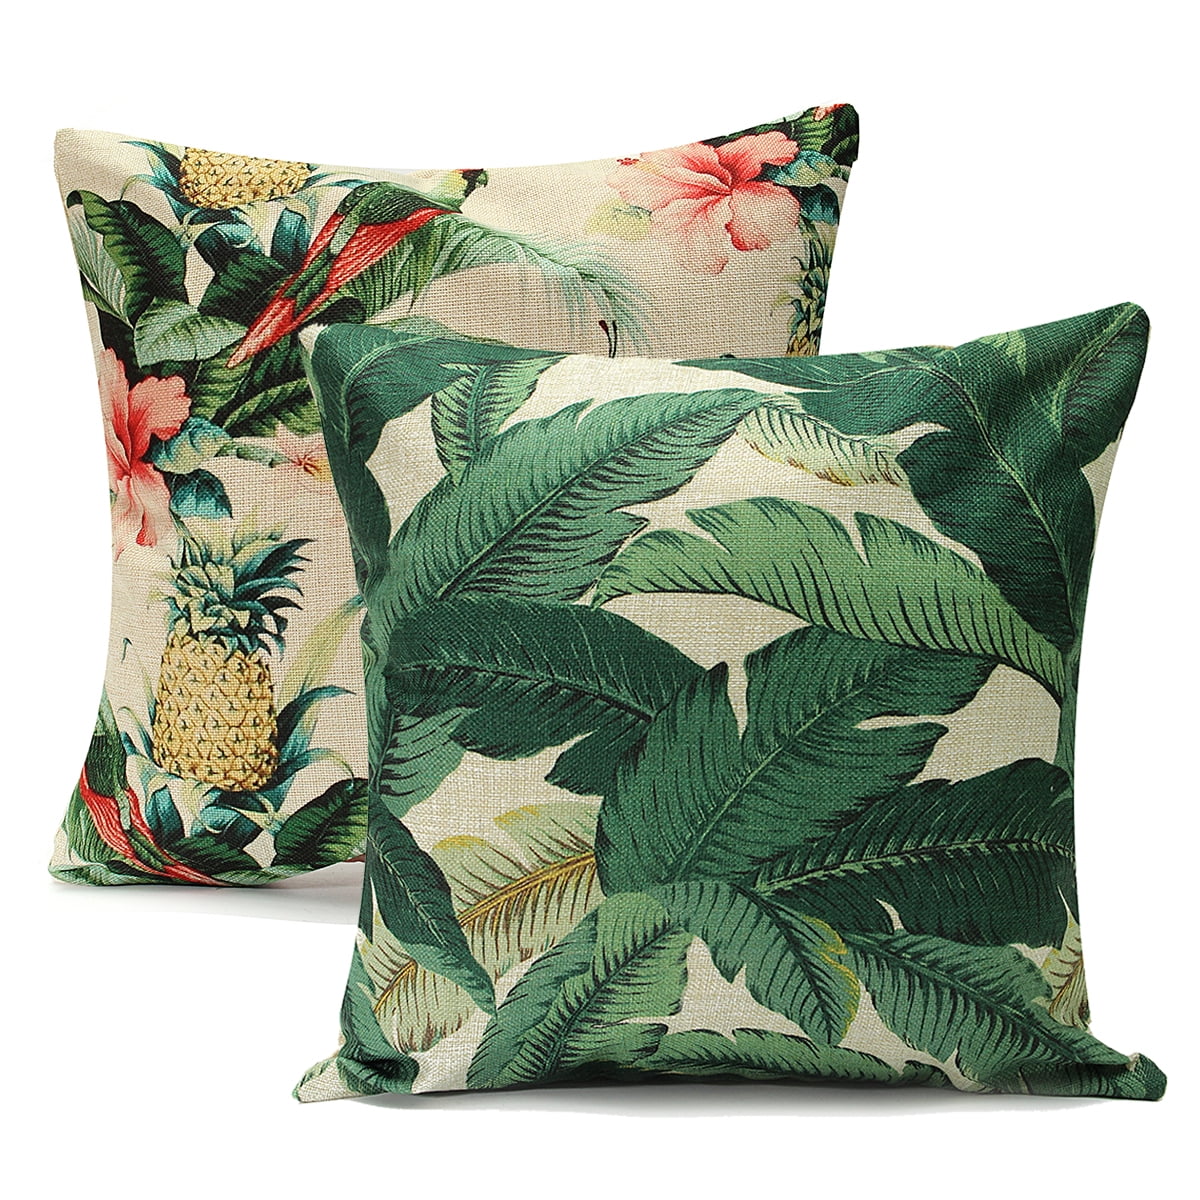 HGOD DESIGNS Pineapple Decorative Throw Pillow Cover Case,Tropical Palm Leaves and Flowers Cotton Linen Outdoor Pillow Cases Square Standard Cushion Covers for Sofa Couch Bed 18x18 inch Gold Green